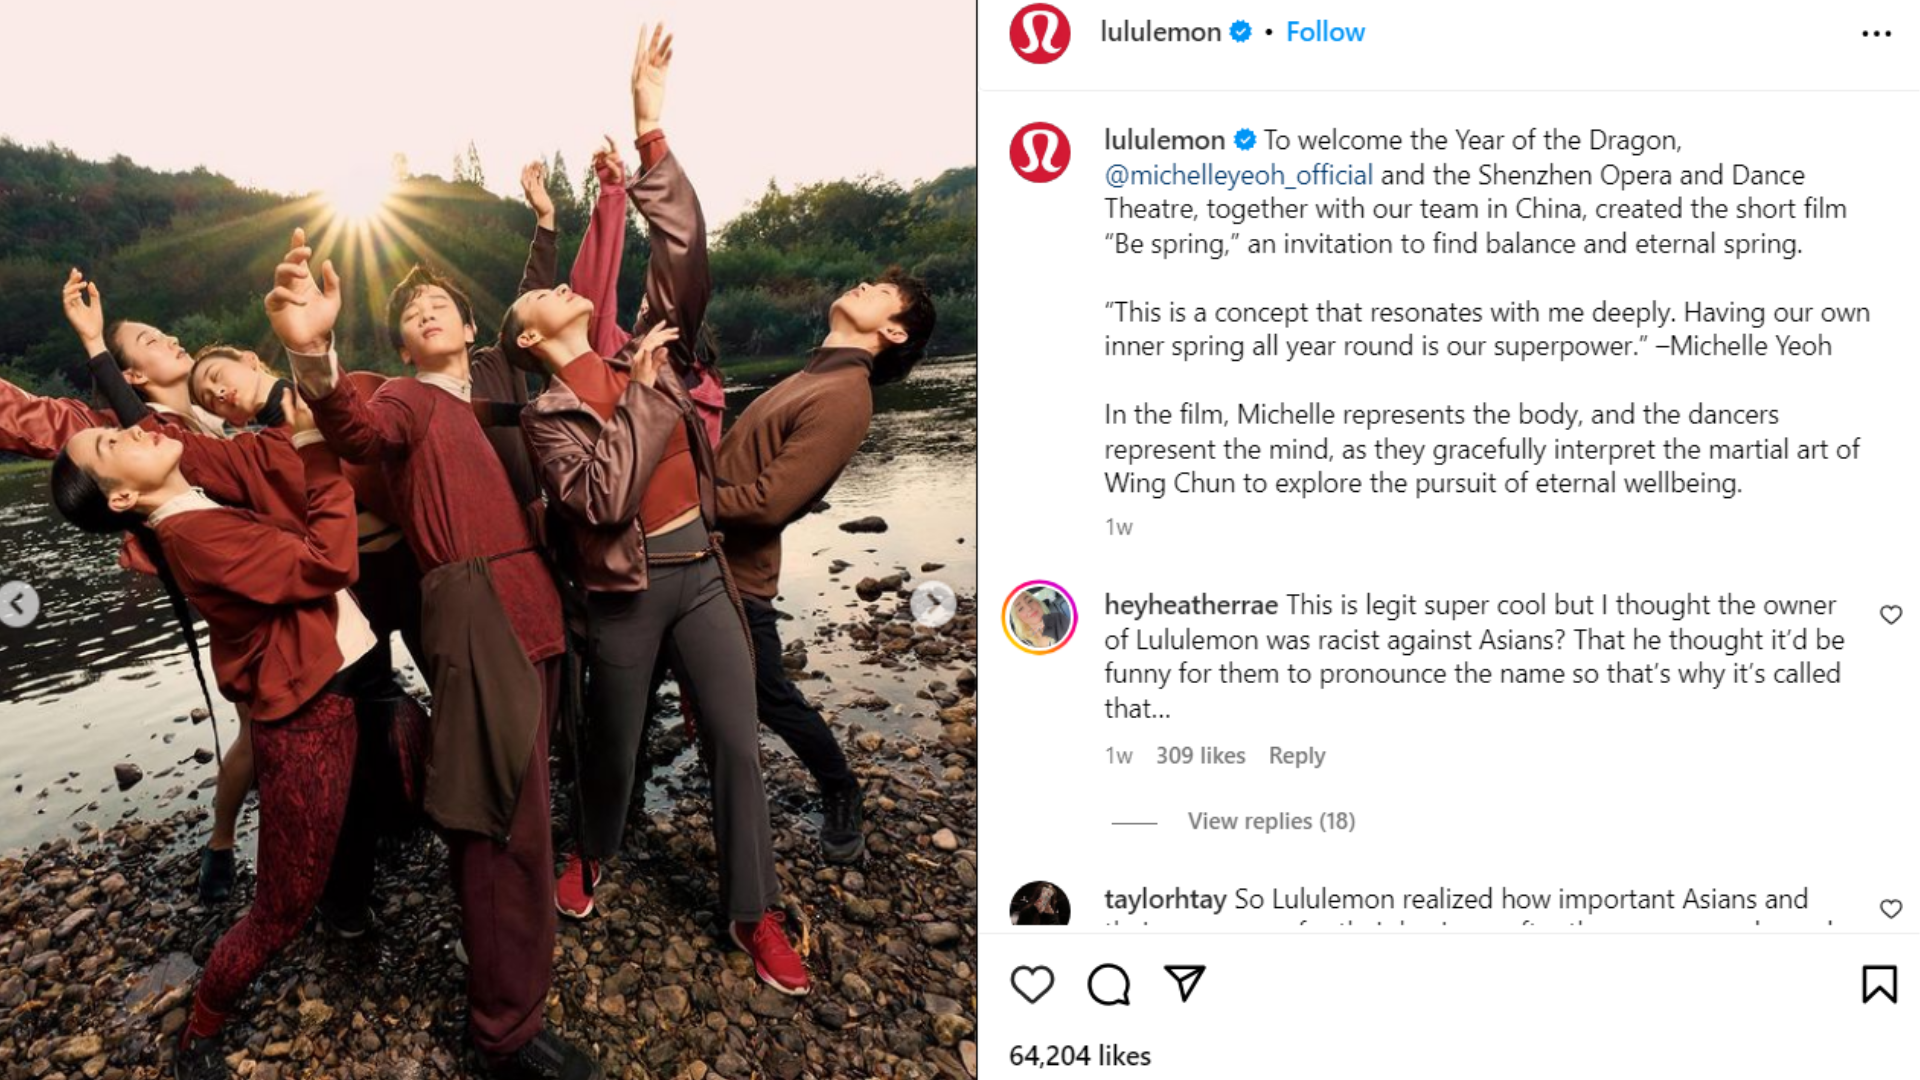 Problematic history behind Lululemon